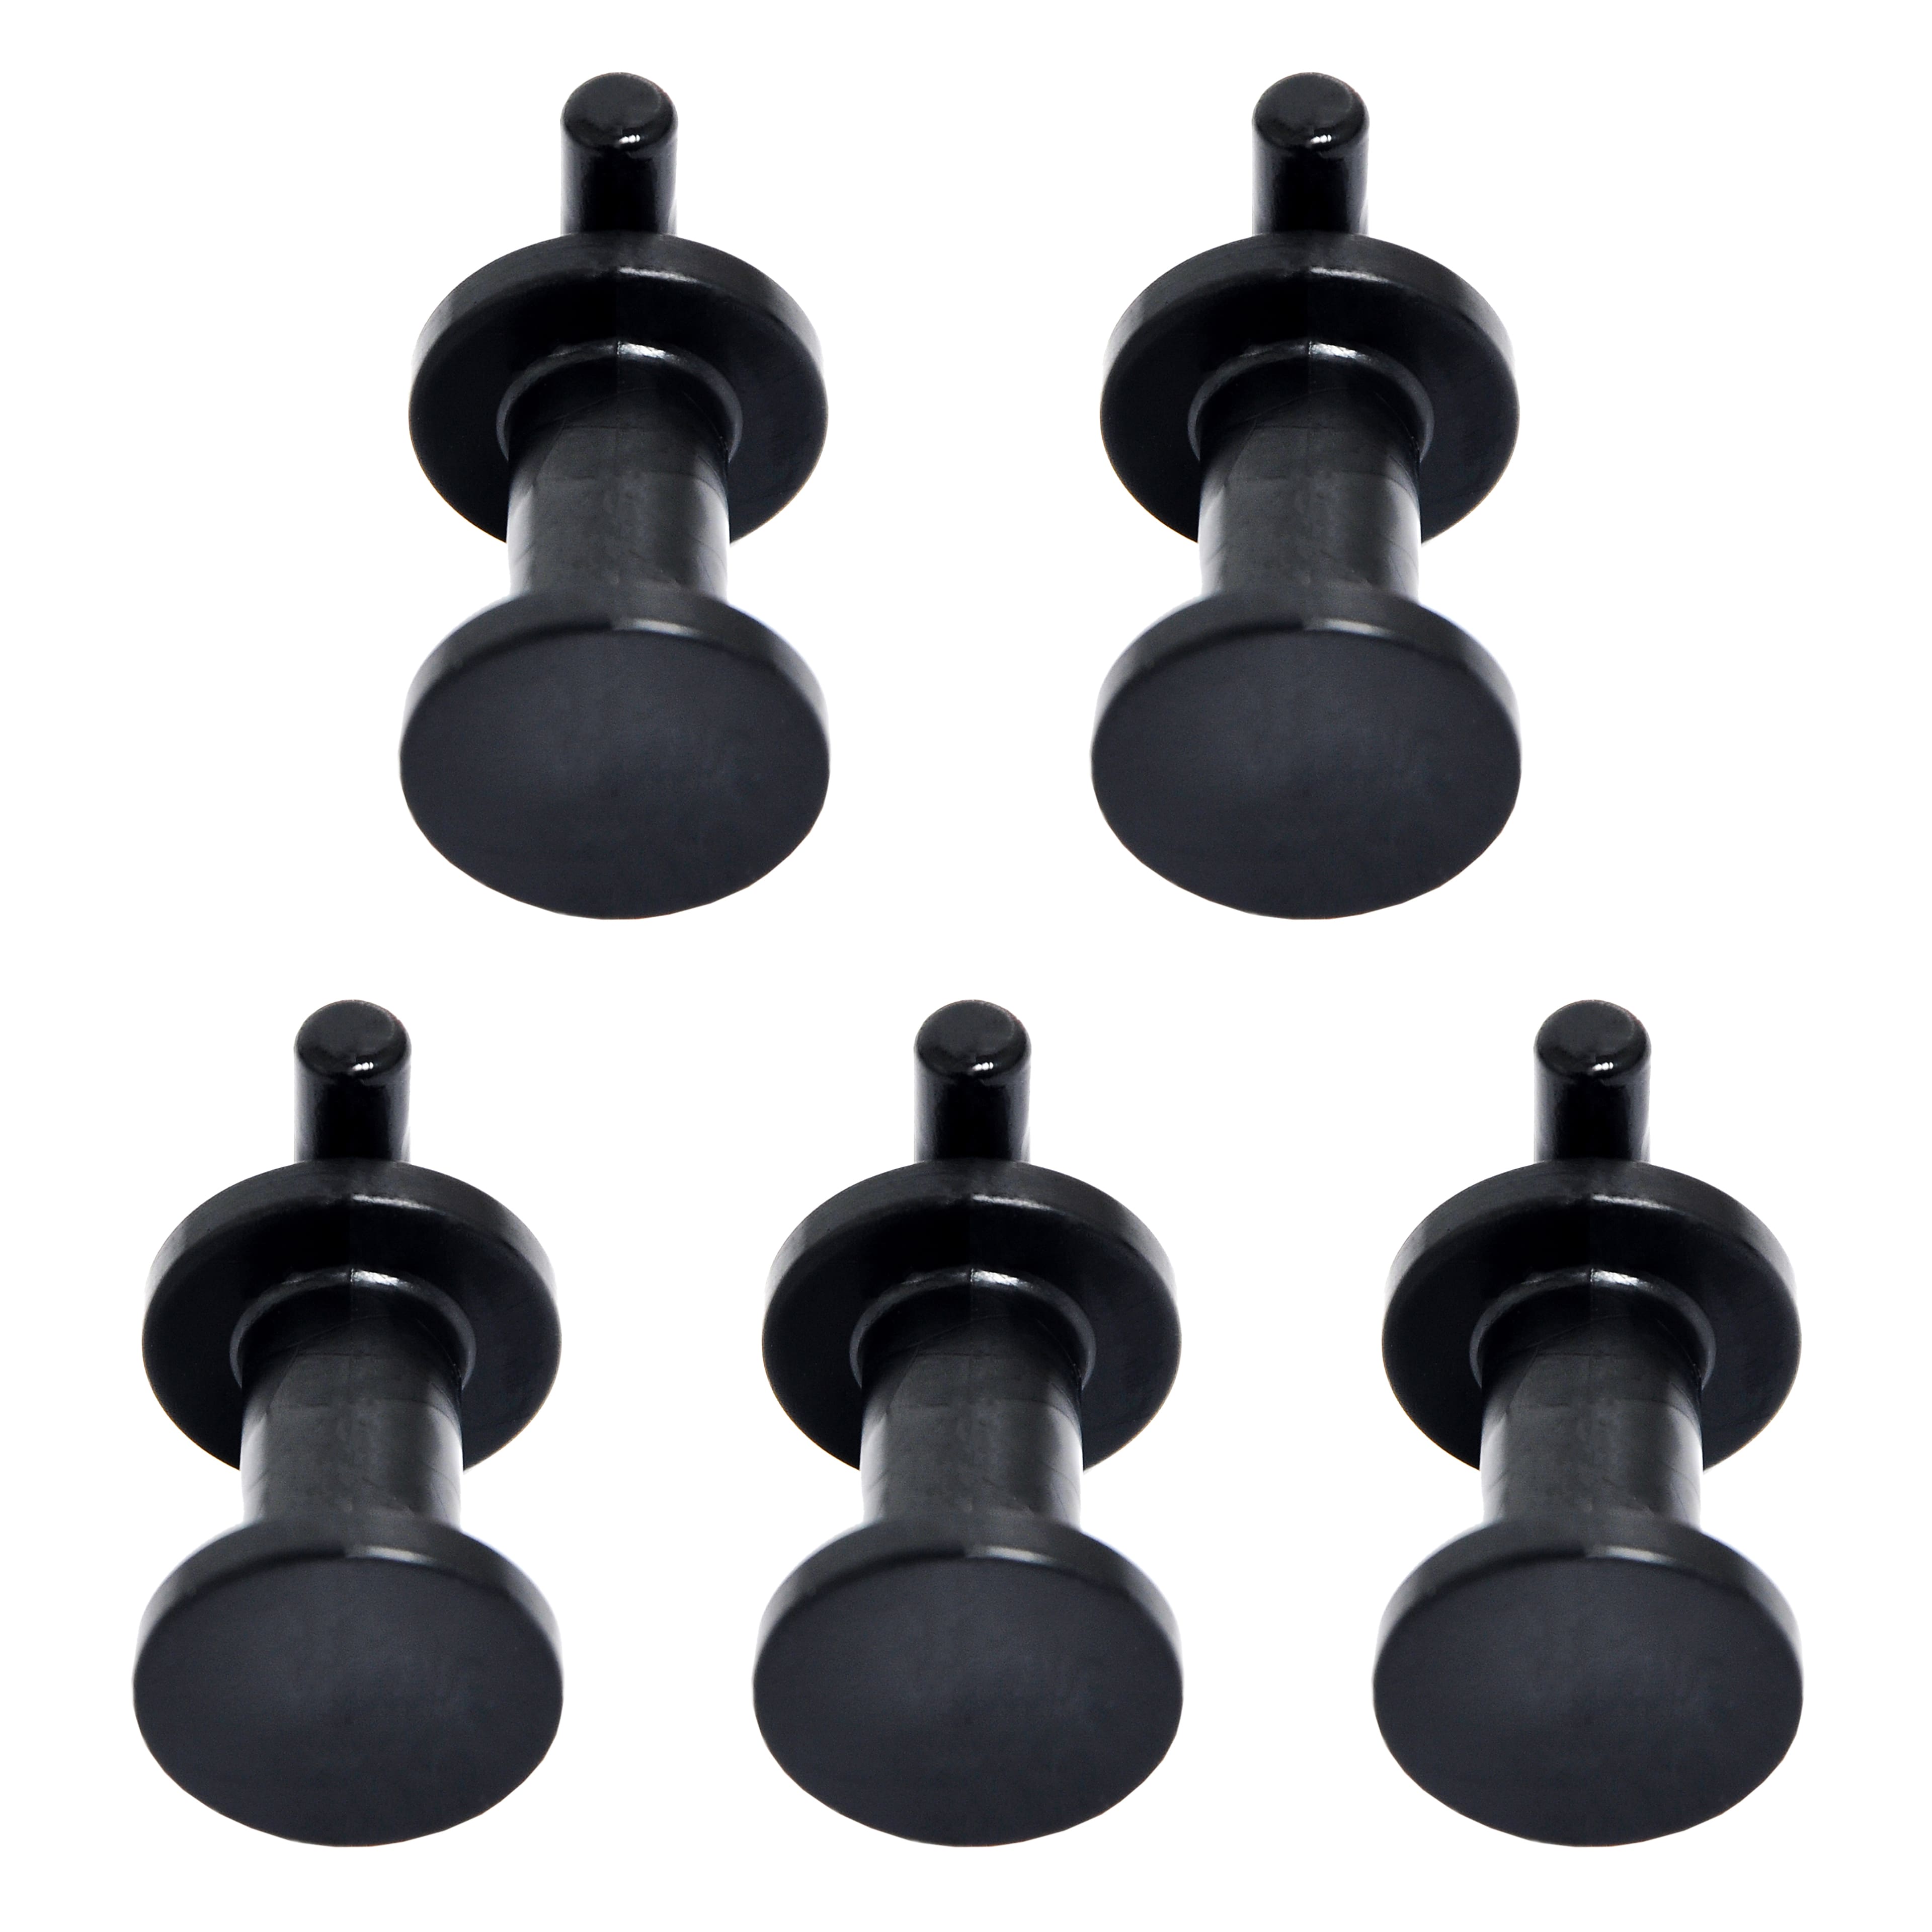 Black Plastic Pegboard Hangers, 5Ct. By Simply Tidy | Michaels